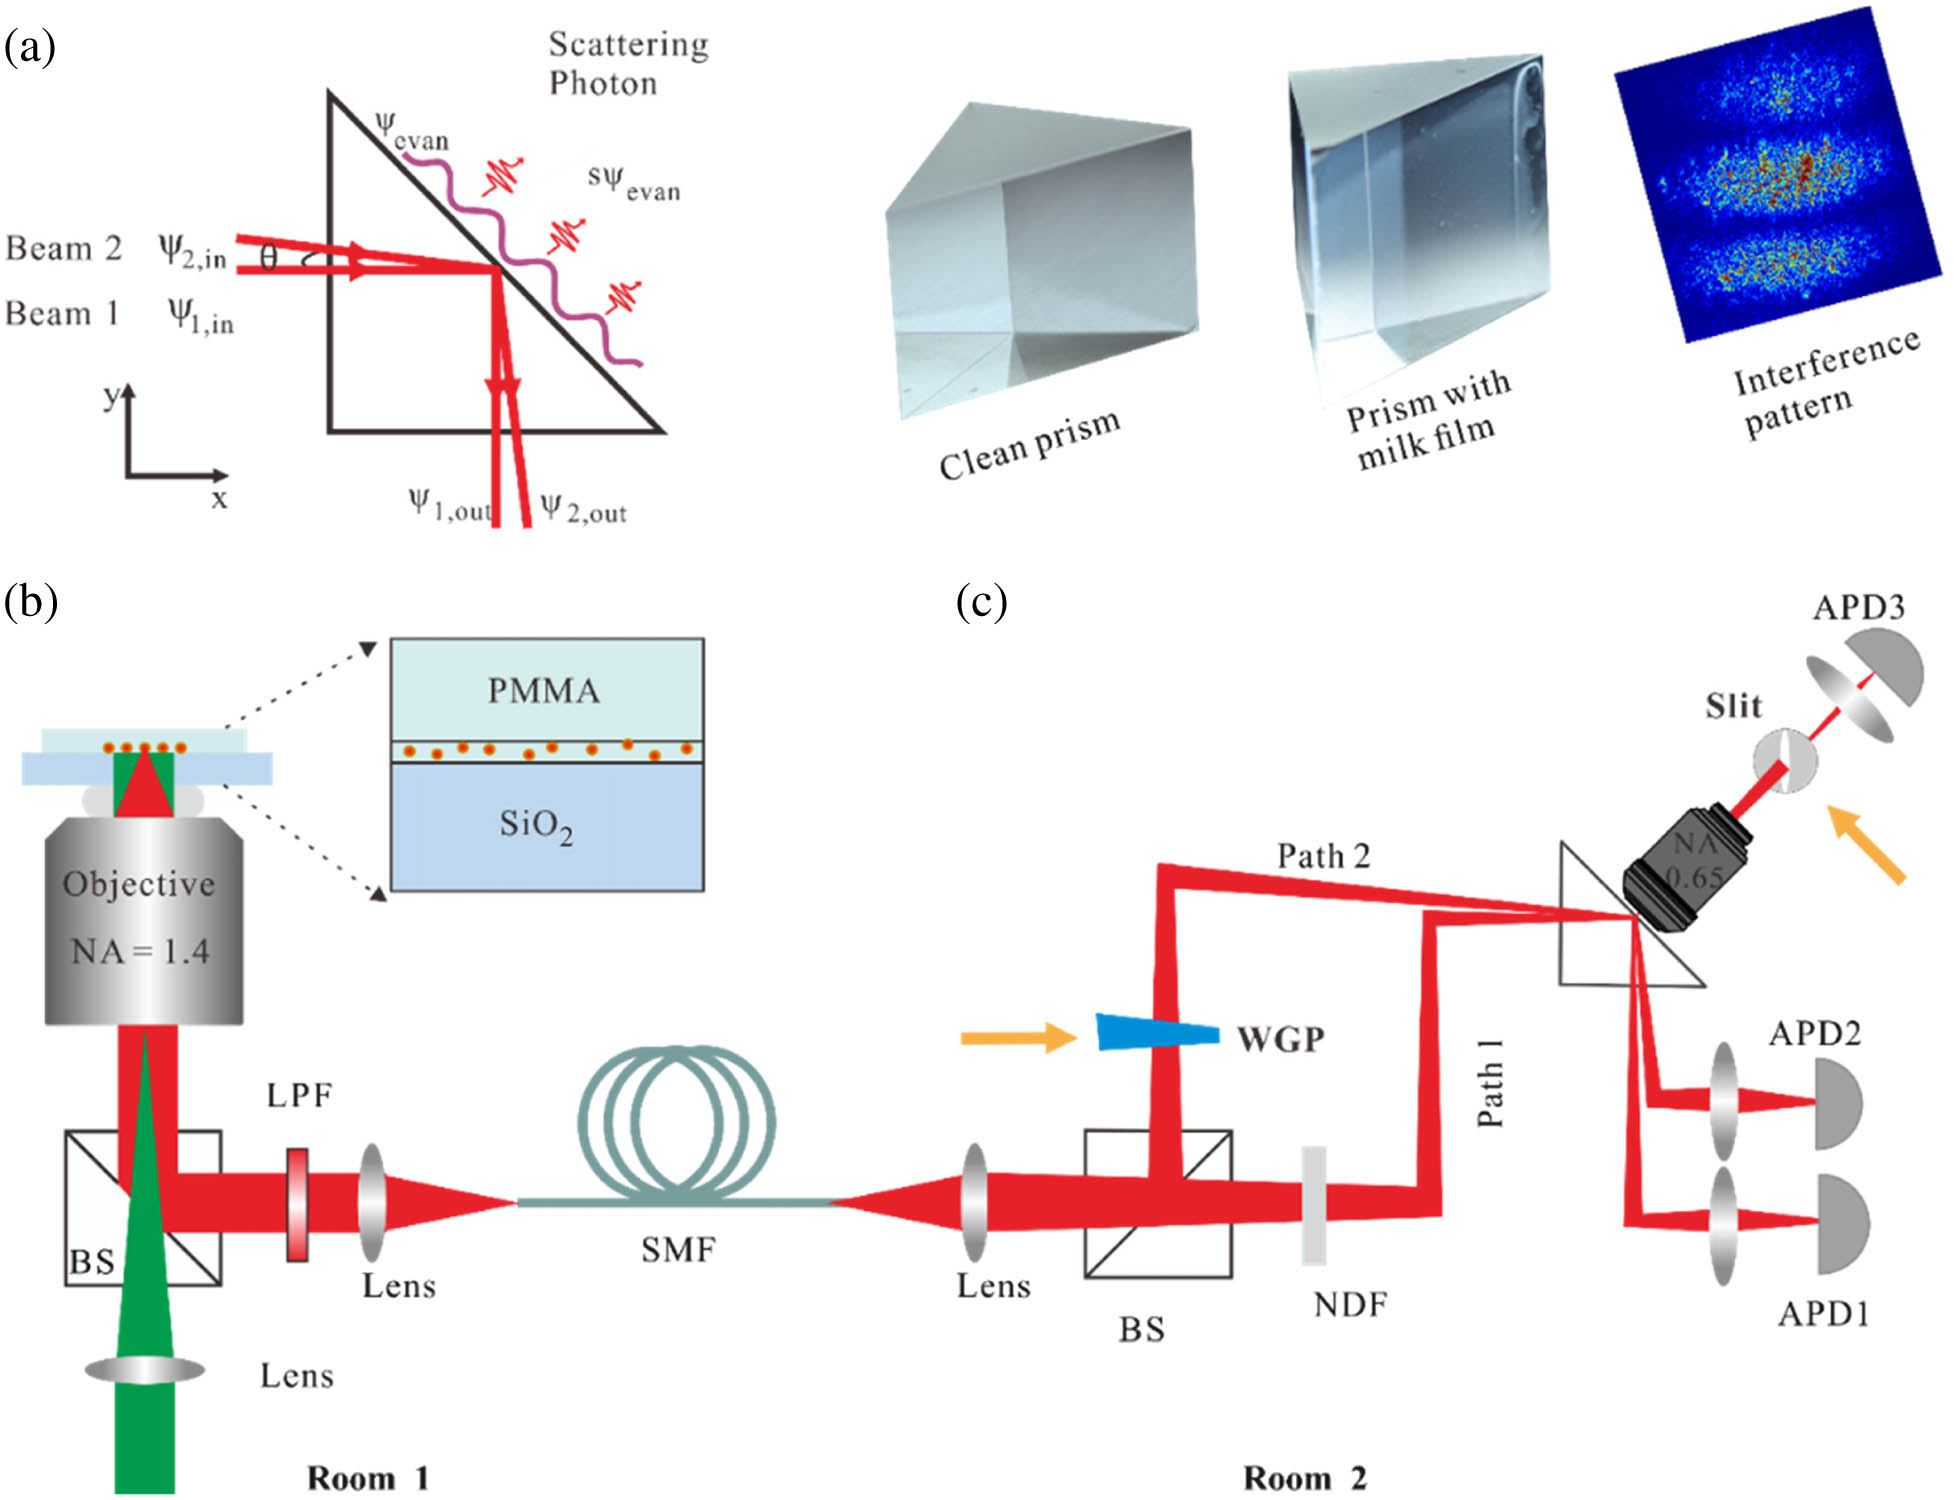 Schematics of the experimental setup of the WM-MZI. (a) Single-photon interference on a prism surface coated with a weakly scattering milk film as an interference screen. The interference pattern on the right is formed by the incidence of a laser beam into the WM-MZI setup. (b) A single-mode fiber (SMF) output single-photon source apparatus. Inset shows the sample structure where CdSe/CdS coreshell quantum dots (QDs) in PMMA serve as single-photon emitters. LPF, long-pass filter. (c) WM-MZI setup. The avalanche photon detectors APD1 and APD2 record two path way information, respectively. A wedge glass plate (WGP) is used to tune the optical length of path 1. APD3 with a position-tunable slit is for observing the interference pattern.